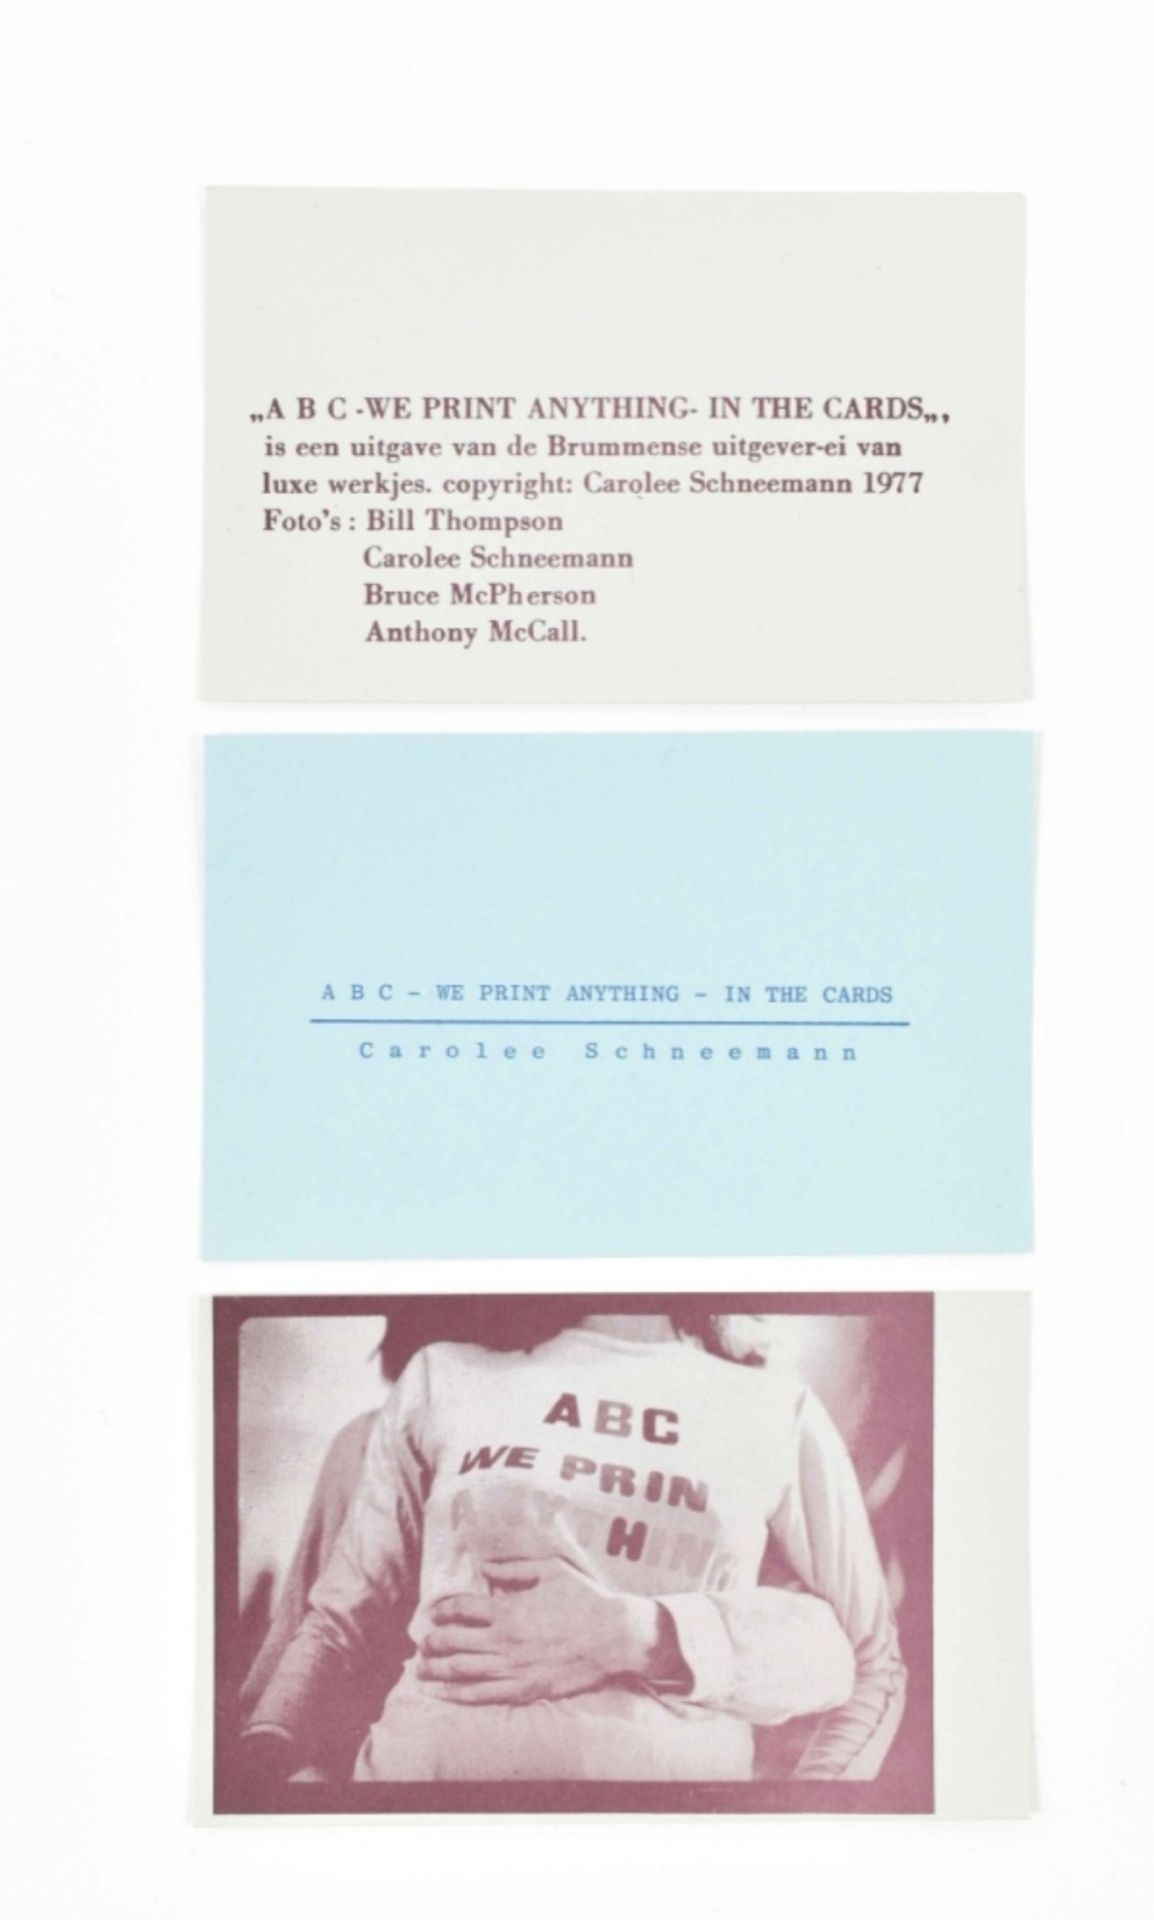 [Women Artists] Carolee Schneemann, ABC- We Print Anything - In The Cards - Image 2 of 9